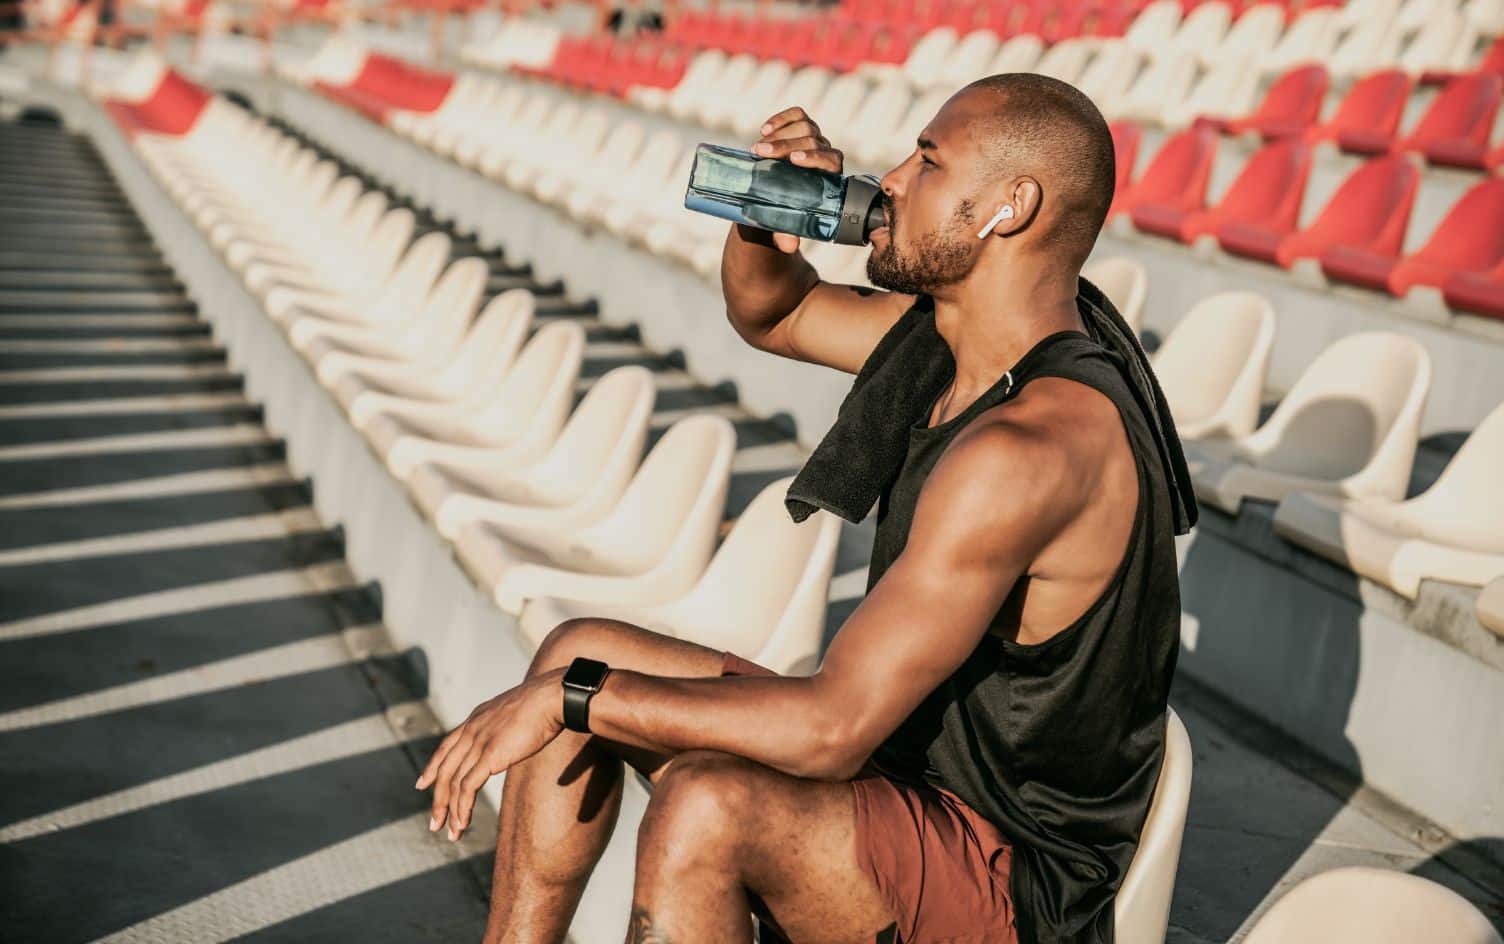 Your Post-Workout Music Has a Big Impact on Your Recovery